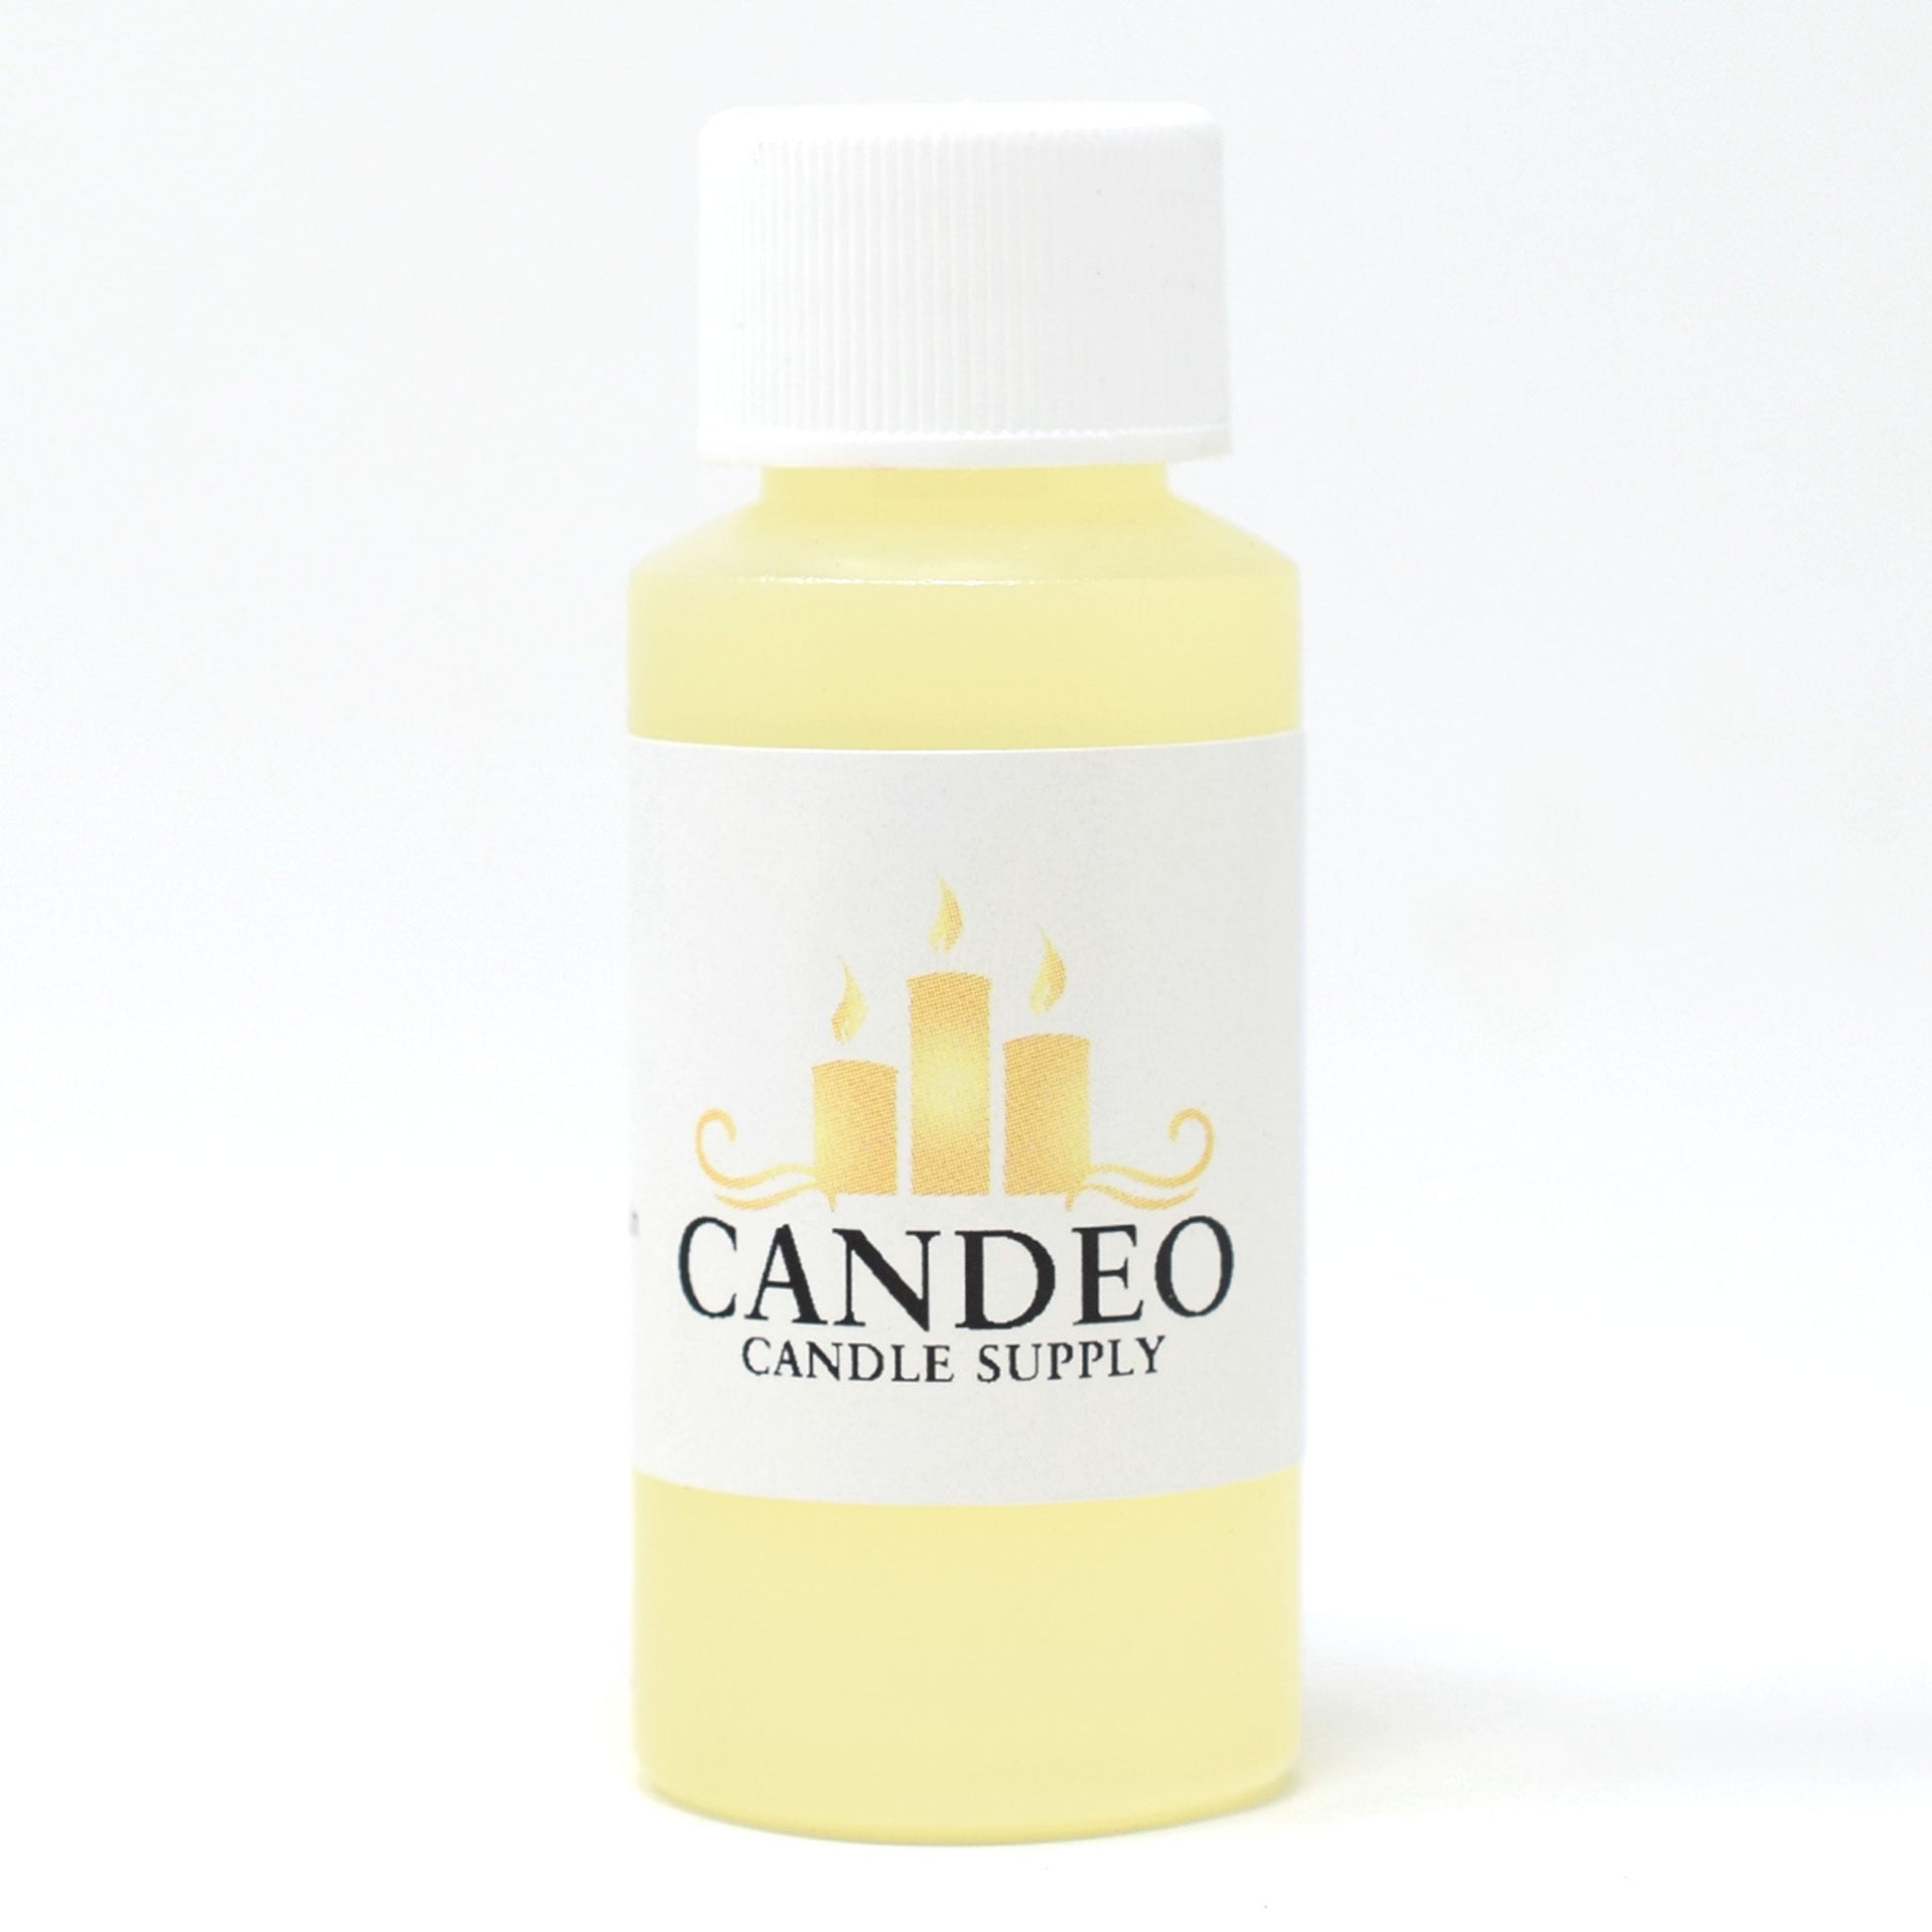 Cranberry Orange Marmalade Fragrance Oil - Candeo Candle Supply